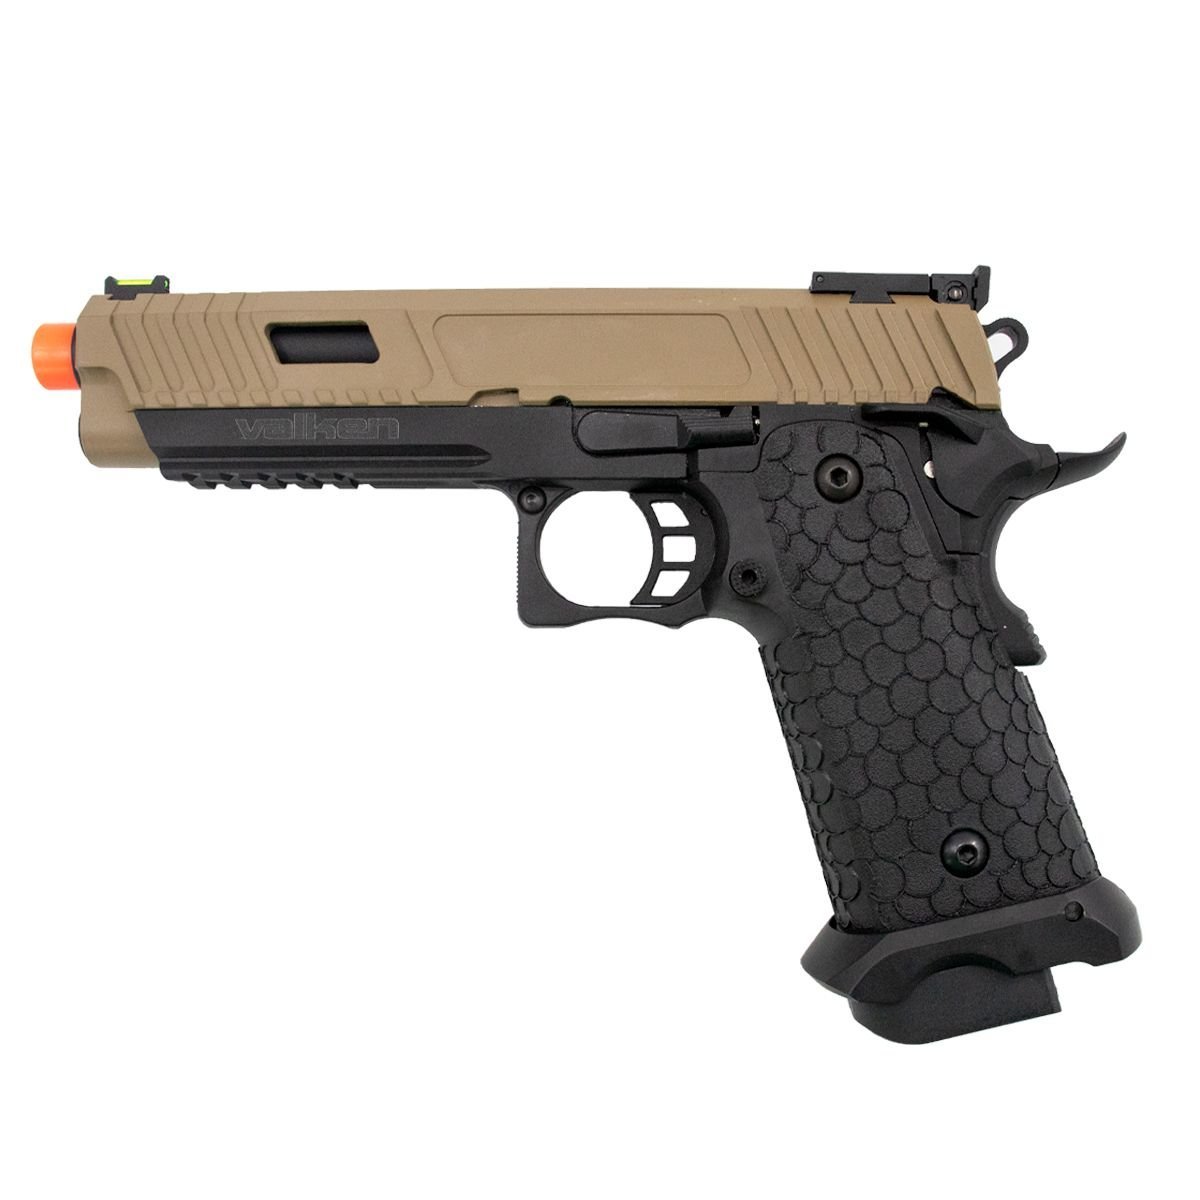 Valken BY HICAPA CO2 Blowback Airsoft Pistol - Eminent Paintball And Airsoft